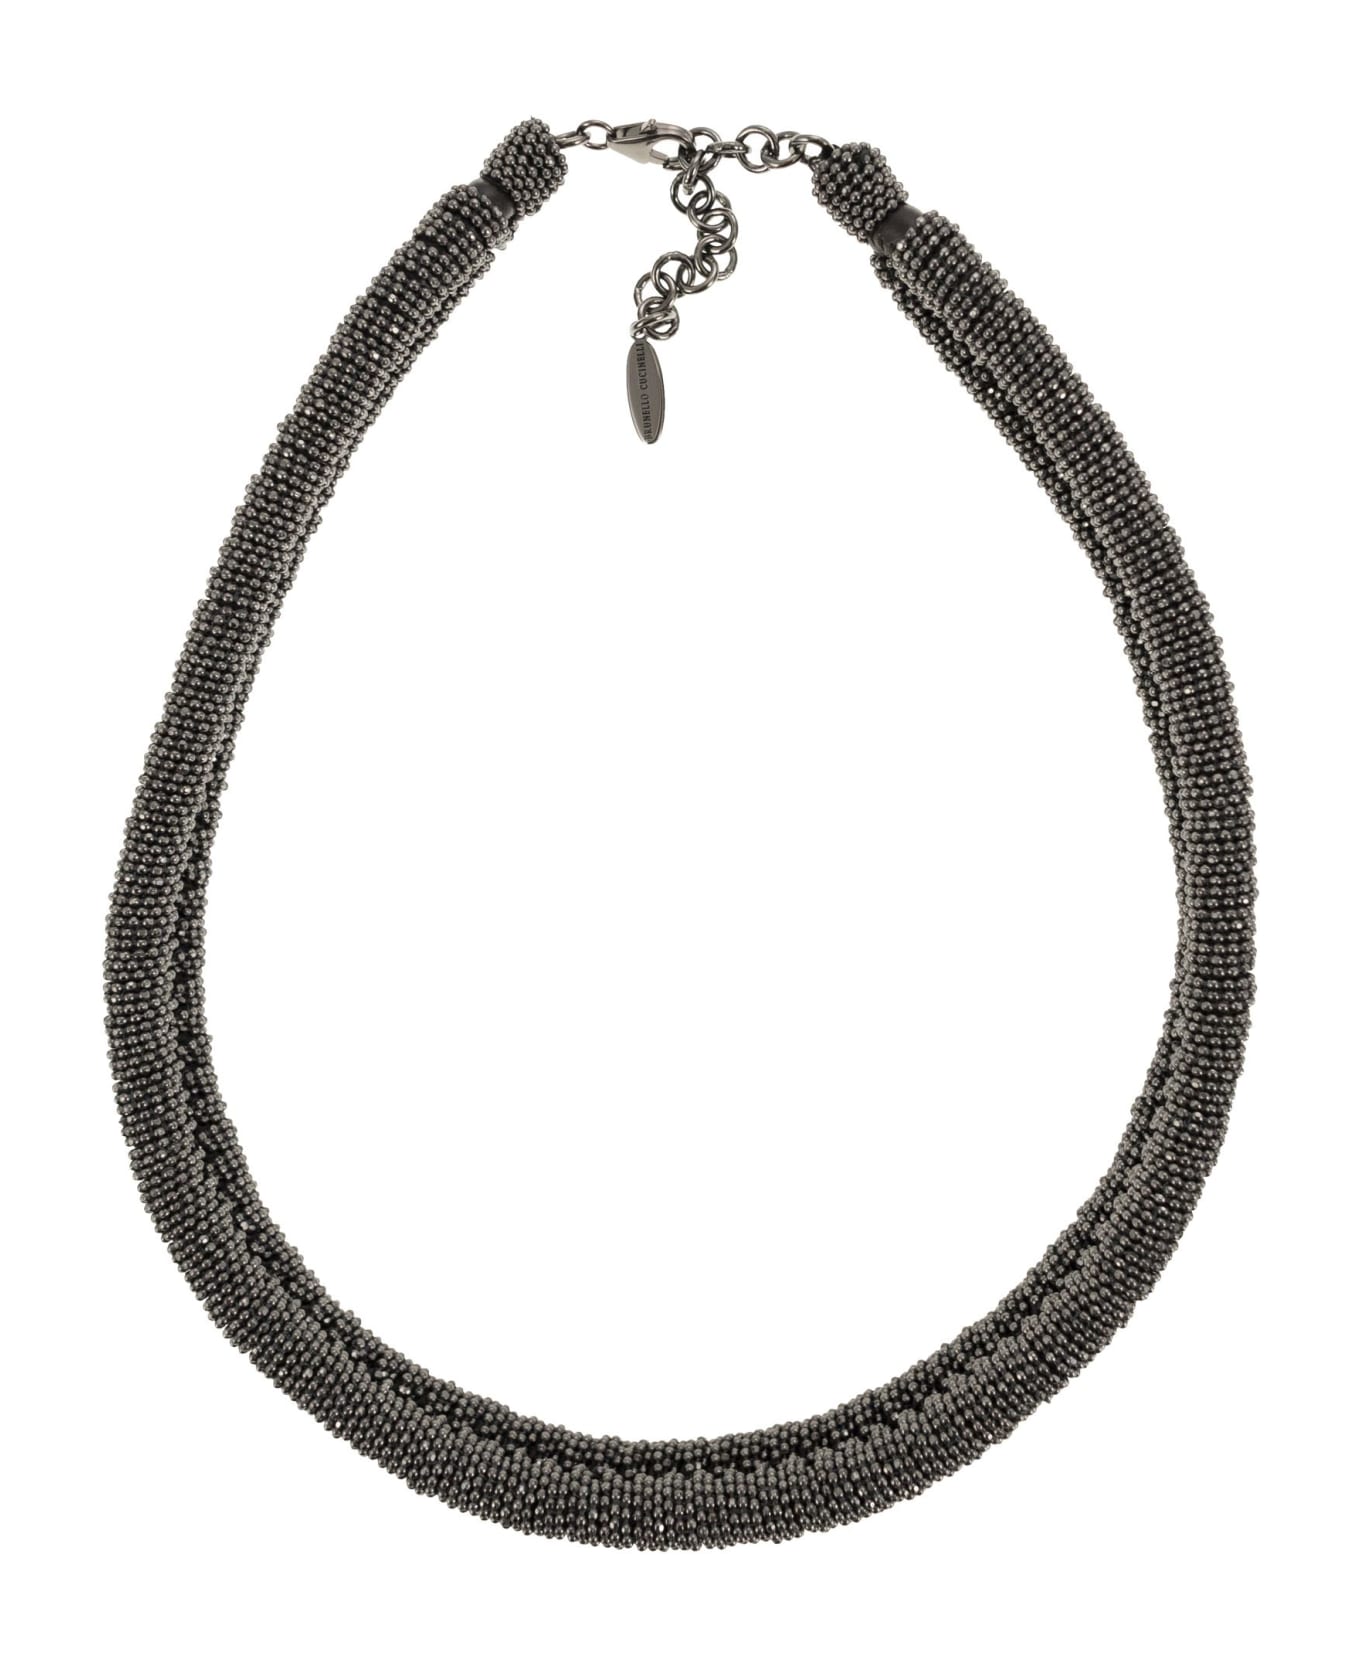 Brunello Cucinelli Necklace - Black ネックレス